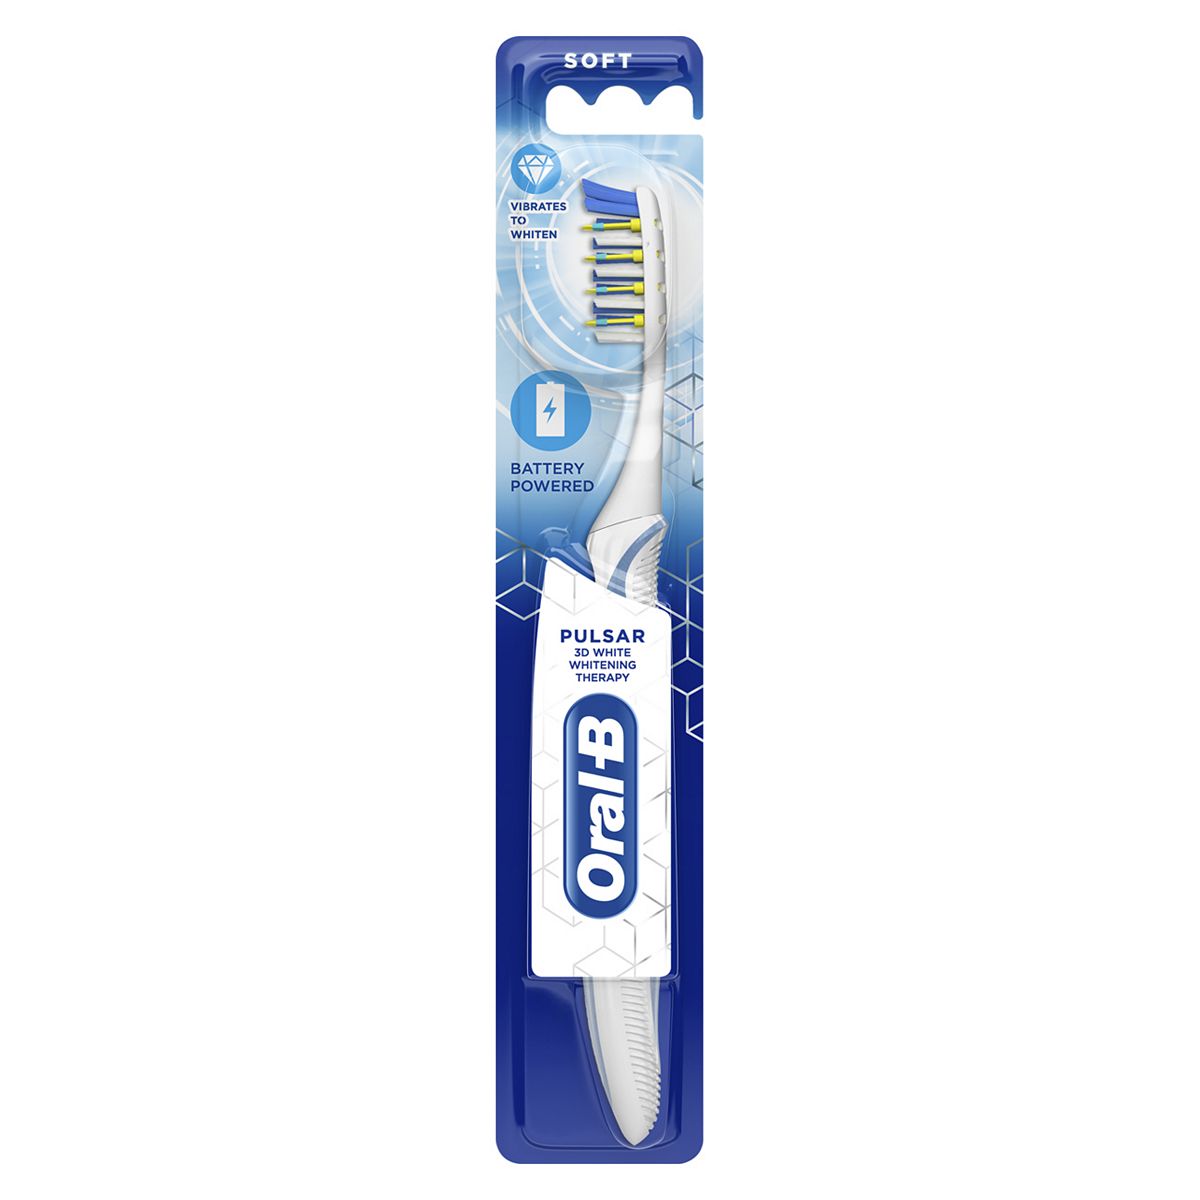 Oral-B Pulsar 3DWhite Whitening Therapy Manual Toothbrush with Battery Power GOODS Boots   